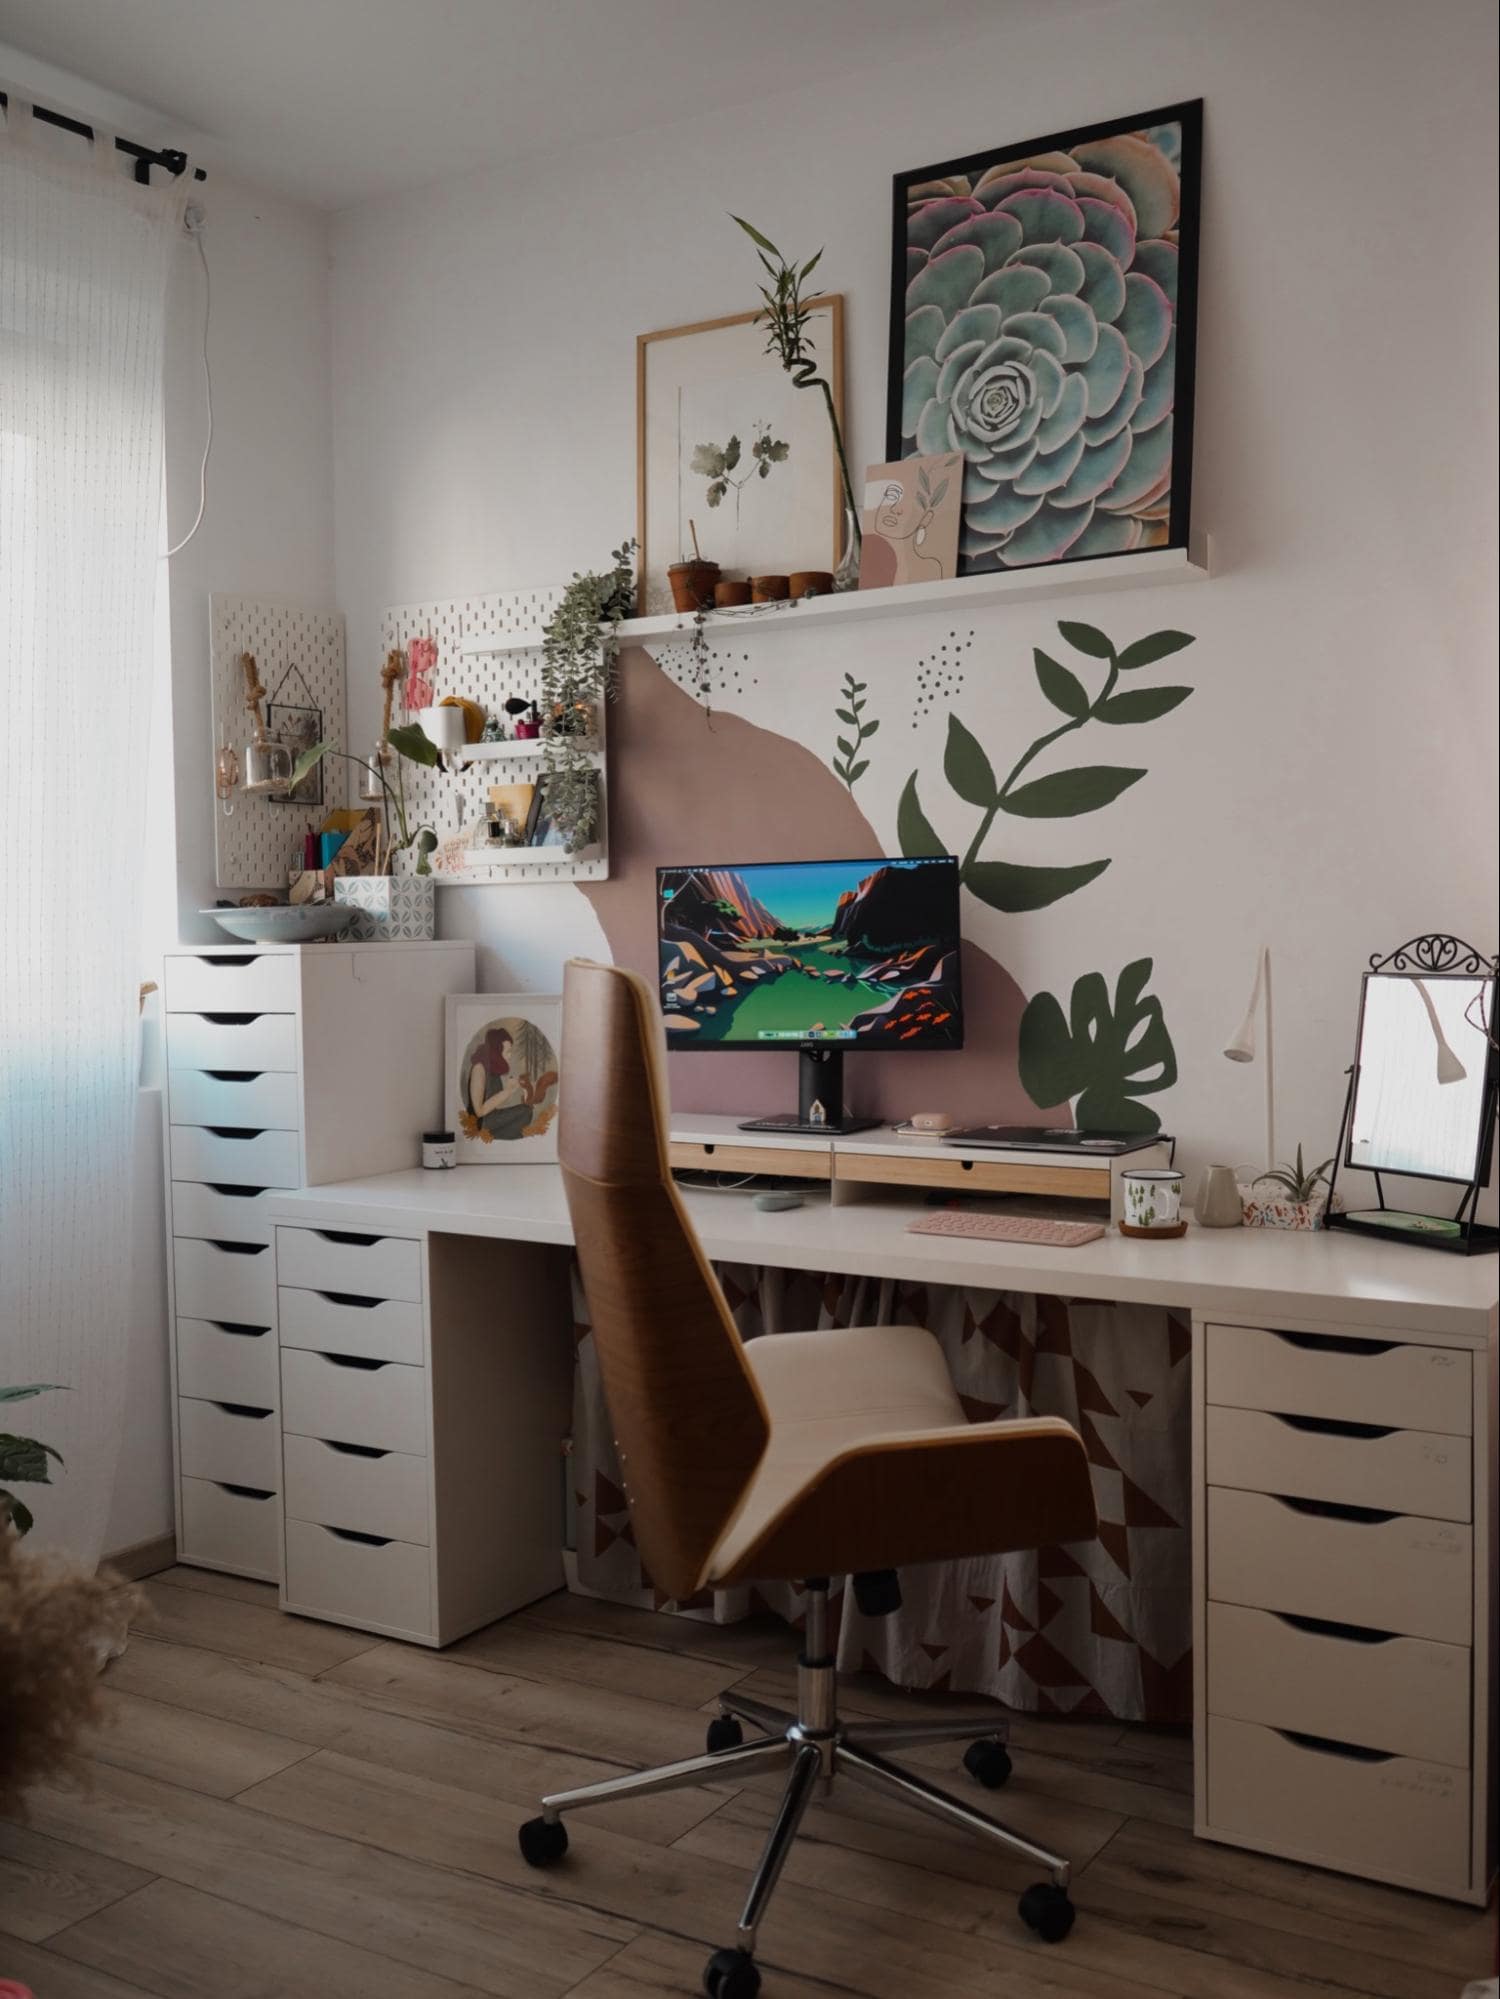 A cosy, artistic home office with a computer on a white desk, surrounded by plants and pegboards, an ergonomic chair, IKEA ALEX drawers, and a large succulent painting on the wall